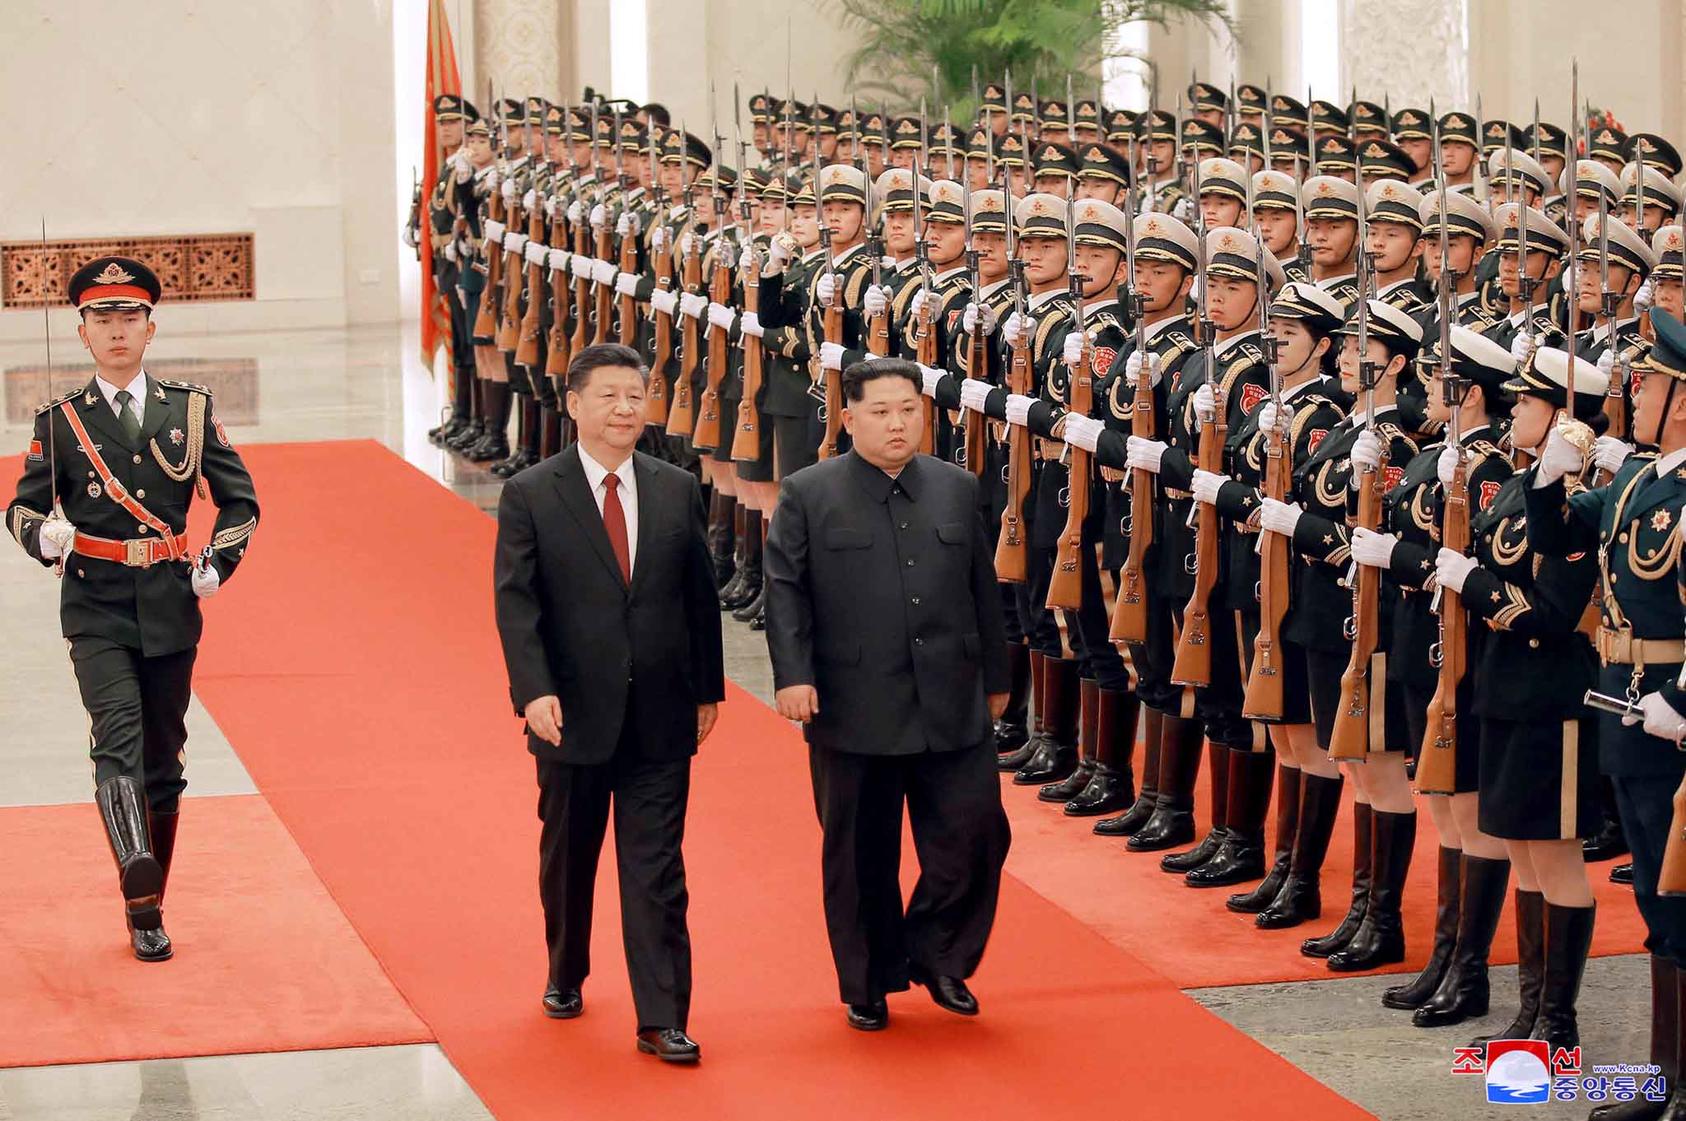 President Xi Jinping of China, left, and Kim Jong-un, North Korea’s enigmatic young leader, inspect an honor guard during a ceremony at the Great Hall of the People in Beijing on March 26, 2018. (Korean Central News Agency via The New York Times)